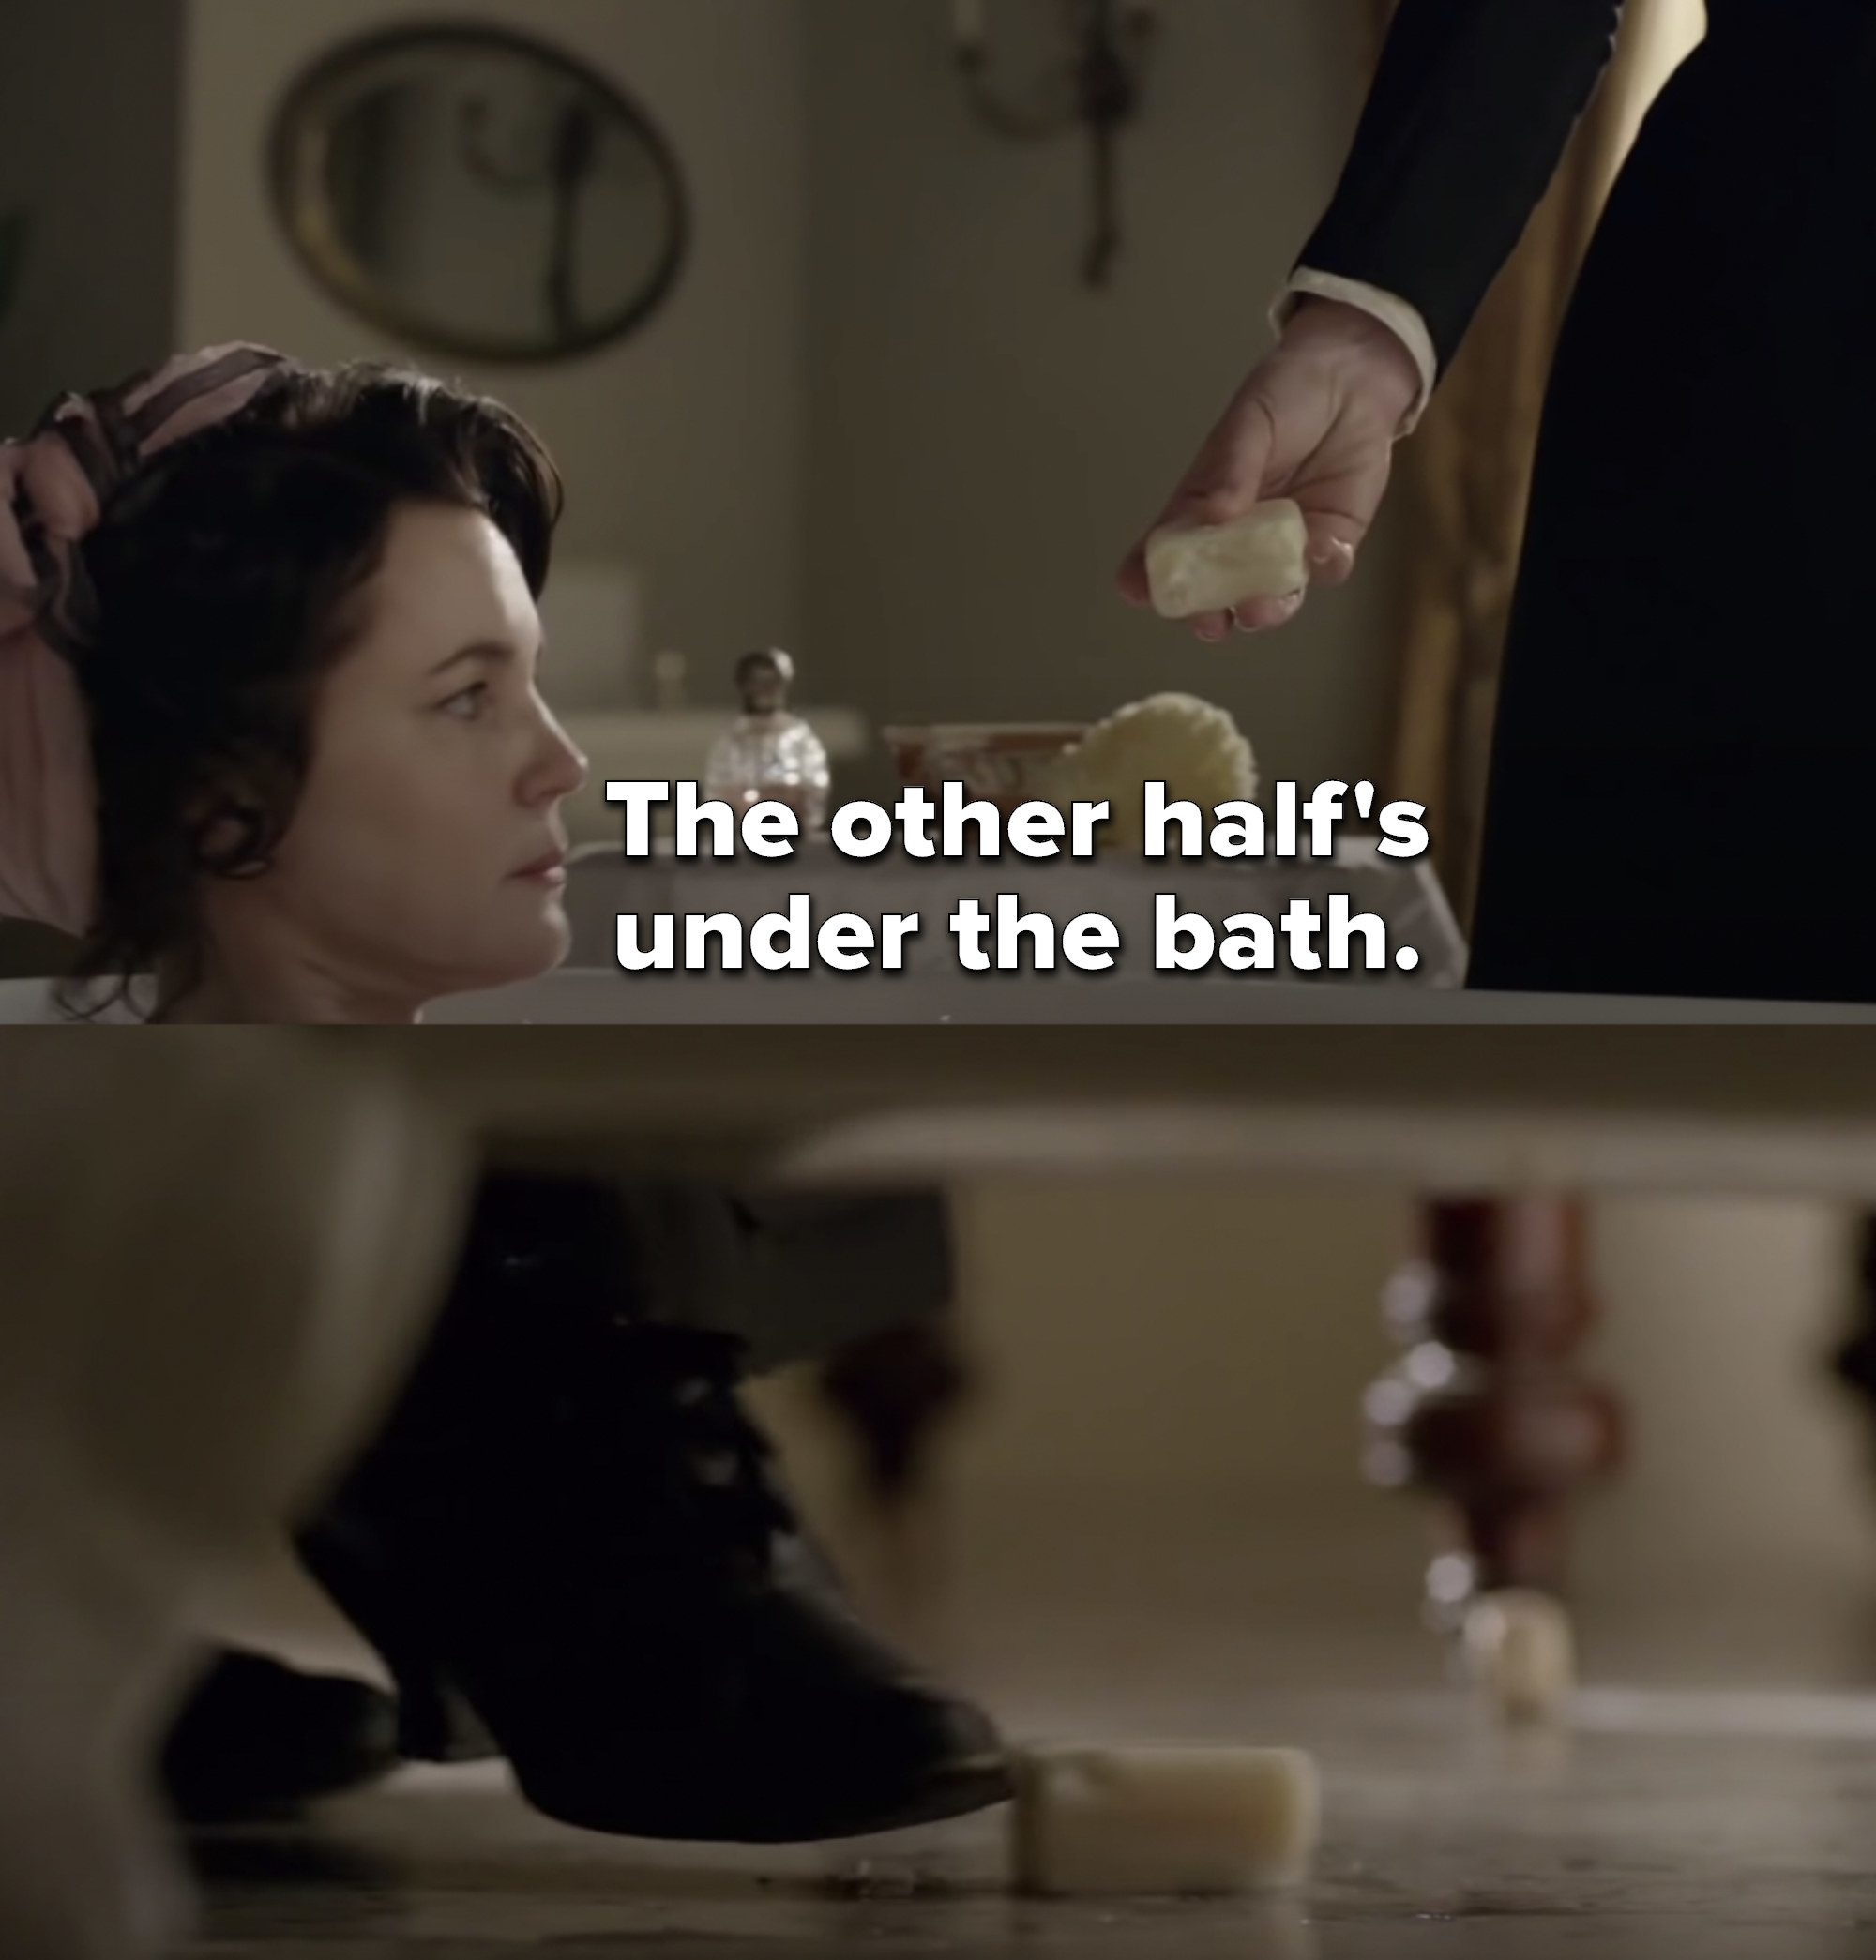 O&#x27;Brien says the other half of the soap is under the bath, then kicks the soap out from under the bath